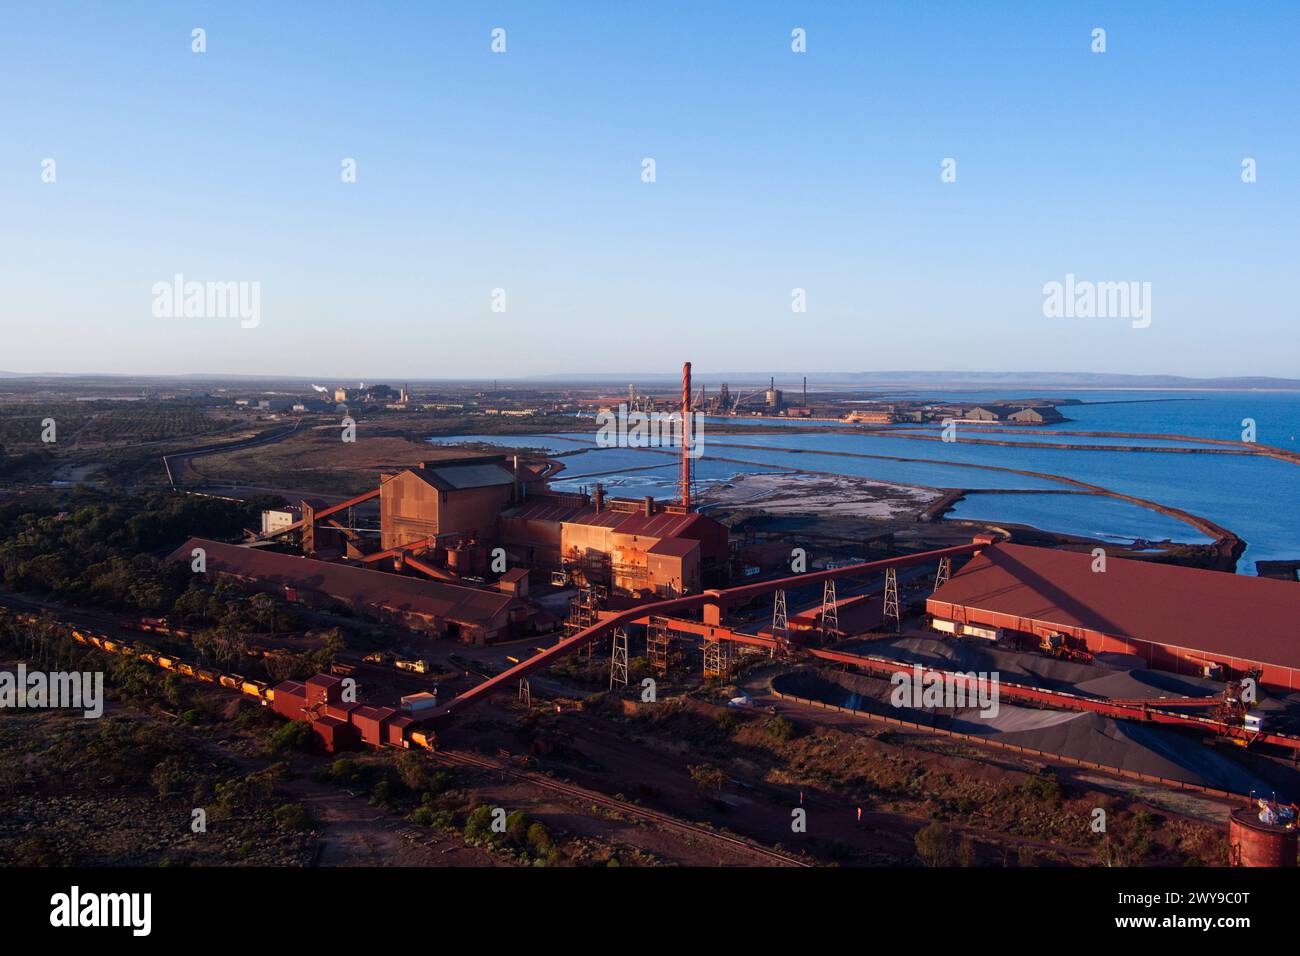 Industrial landscape at the iron ore pellet processing foundry at Whyalla South Australia Stock Photo